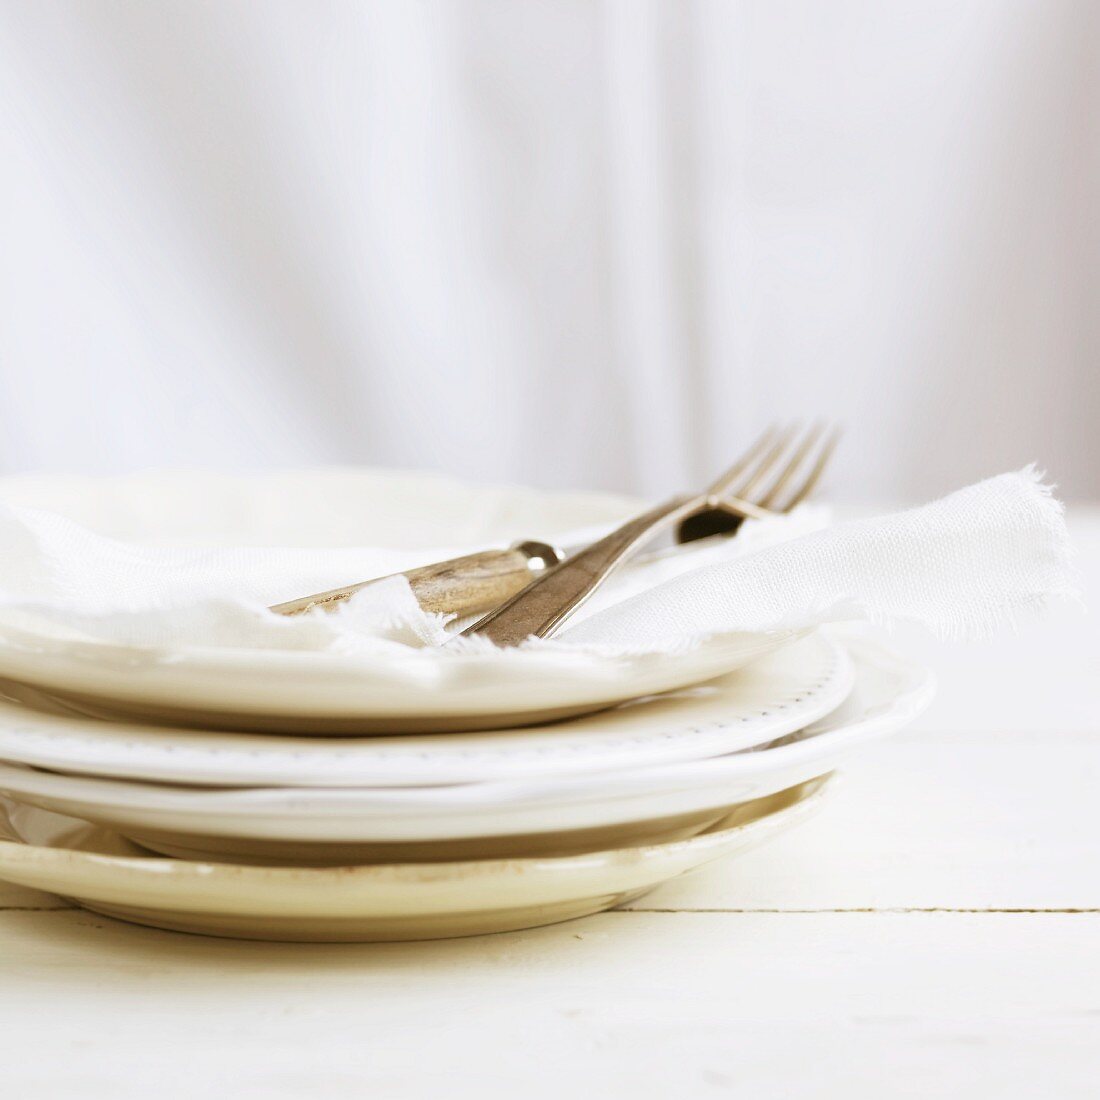 White plates, napkins and cutlery